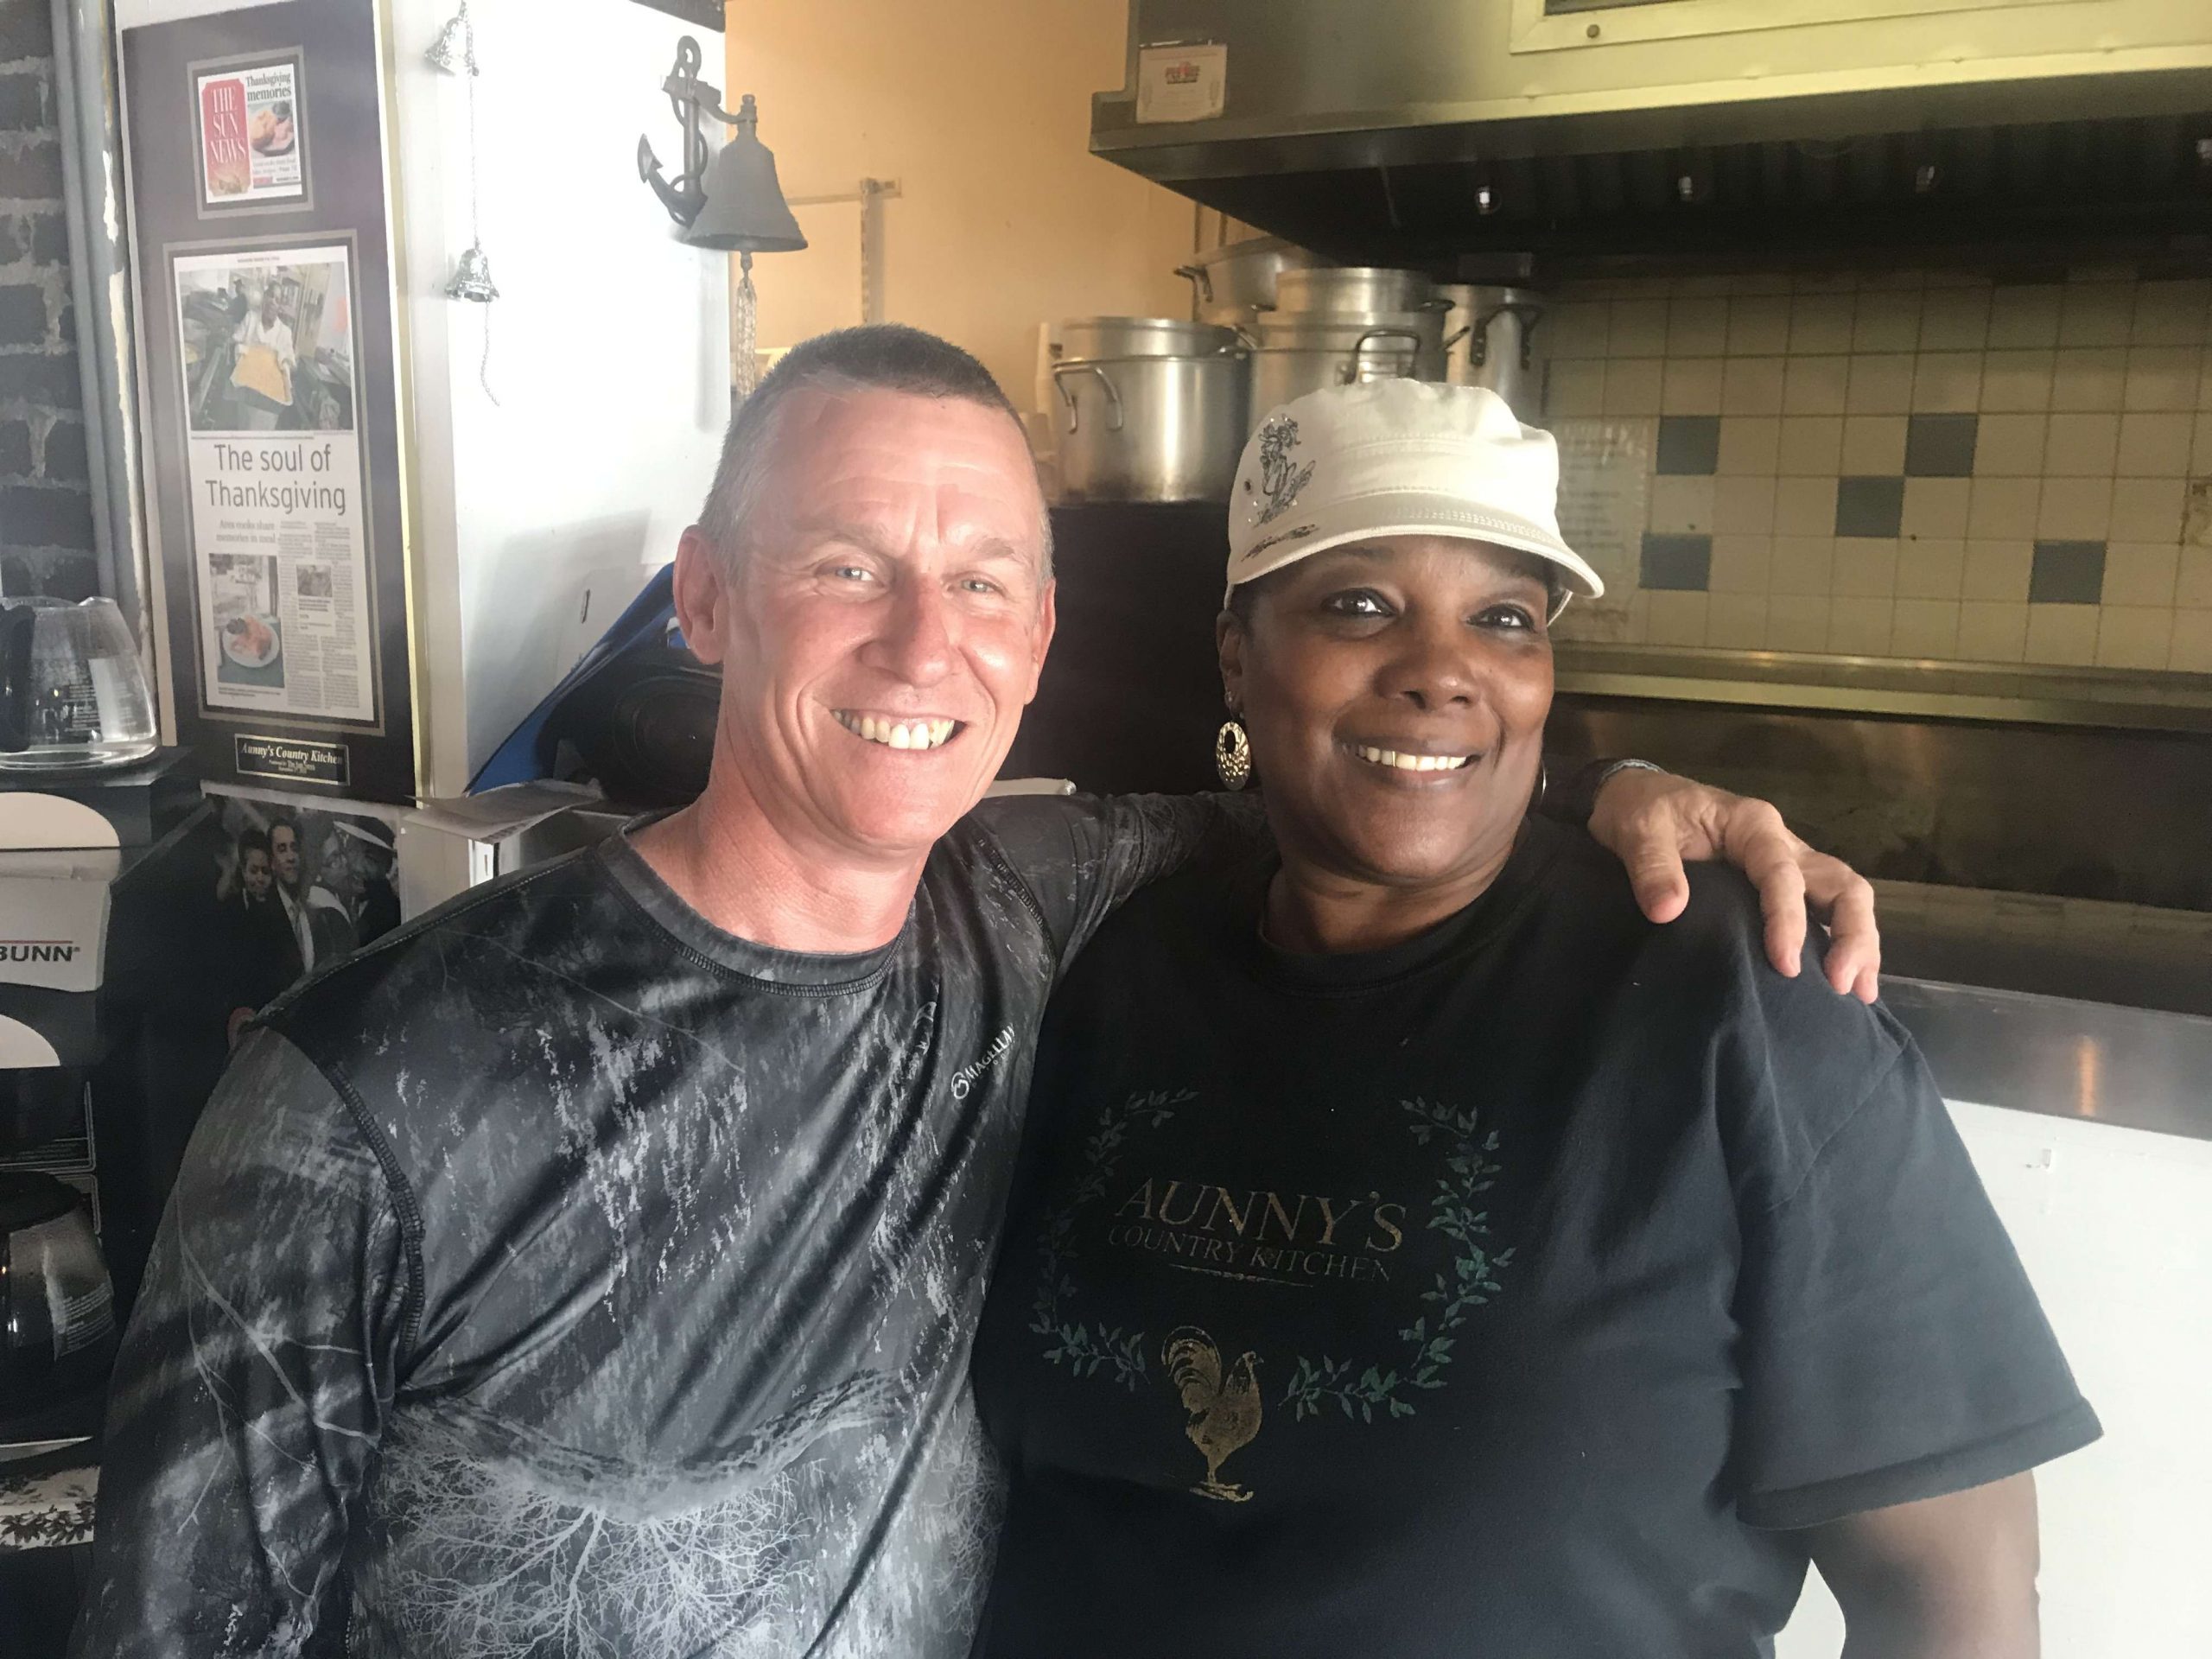 Aunny herself mans the kitchen. She left the kitchen to chat and take a couple of photos with me and Bassmaster writer Craig Lamb. Craig and I agreed that weâd each weigh 300 pounds if we lived close to the restaurant.
